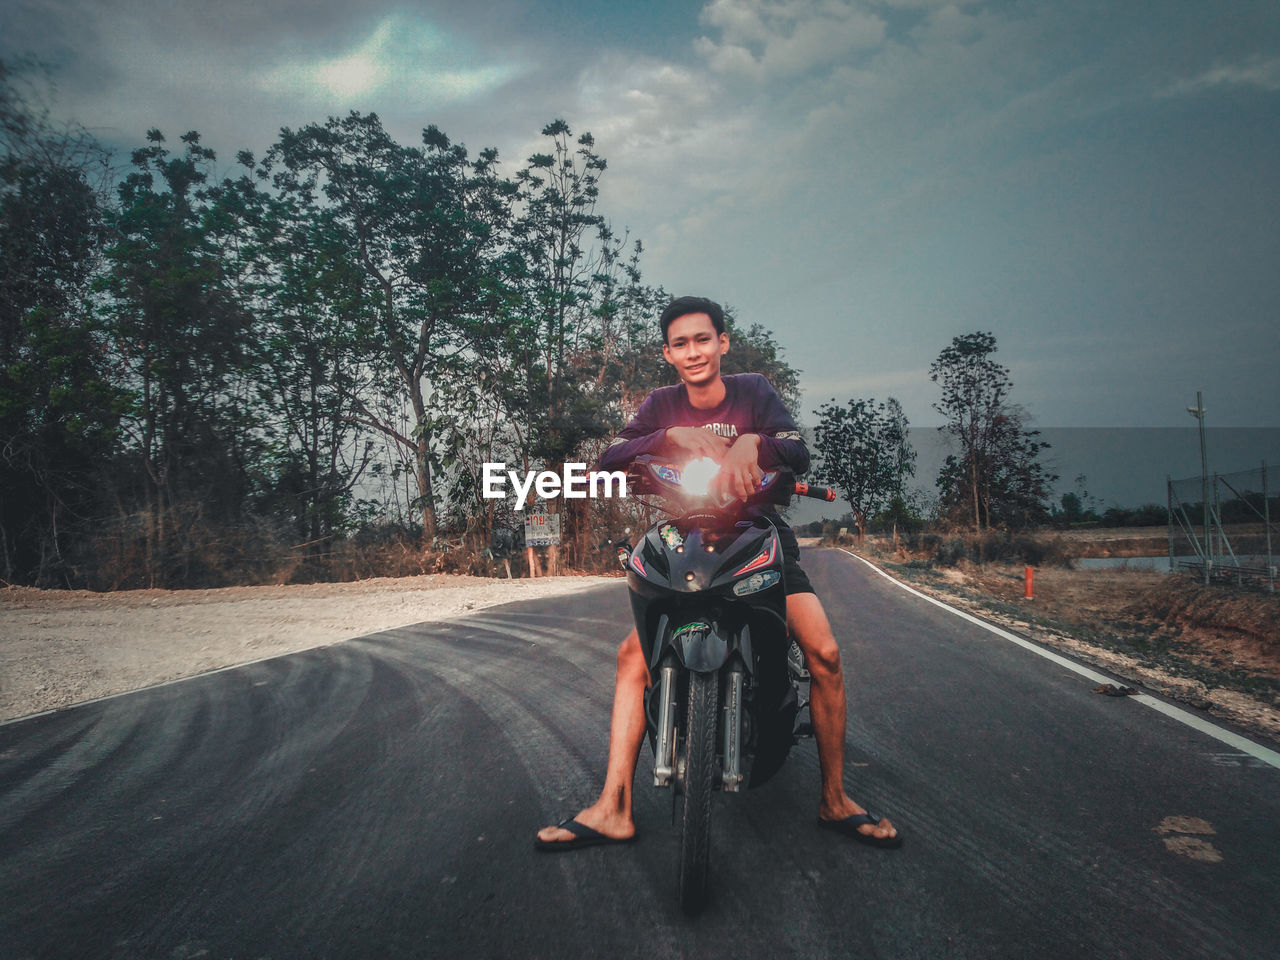 Portrait of man riding motorcycle on road against sky